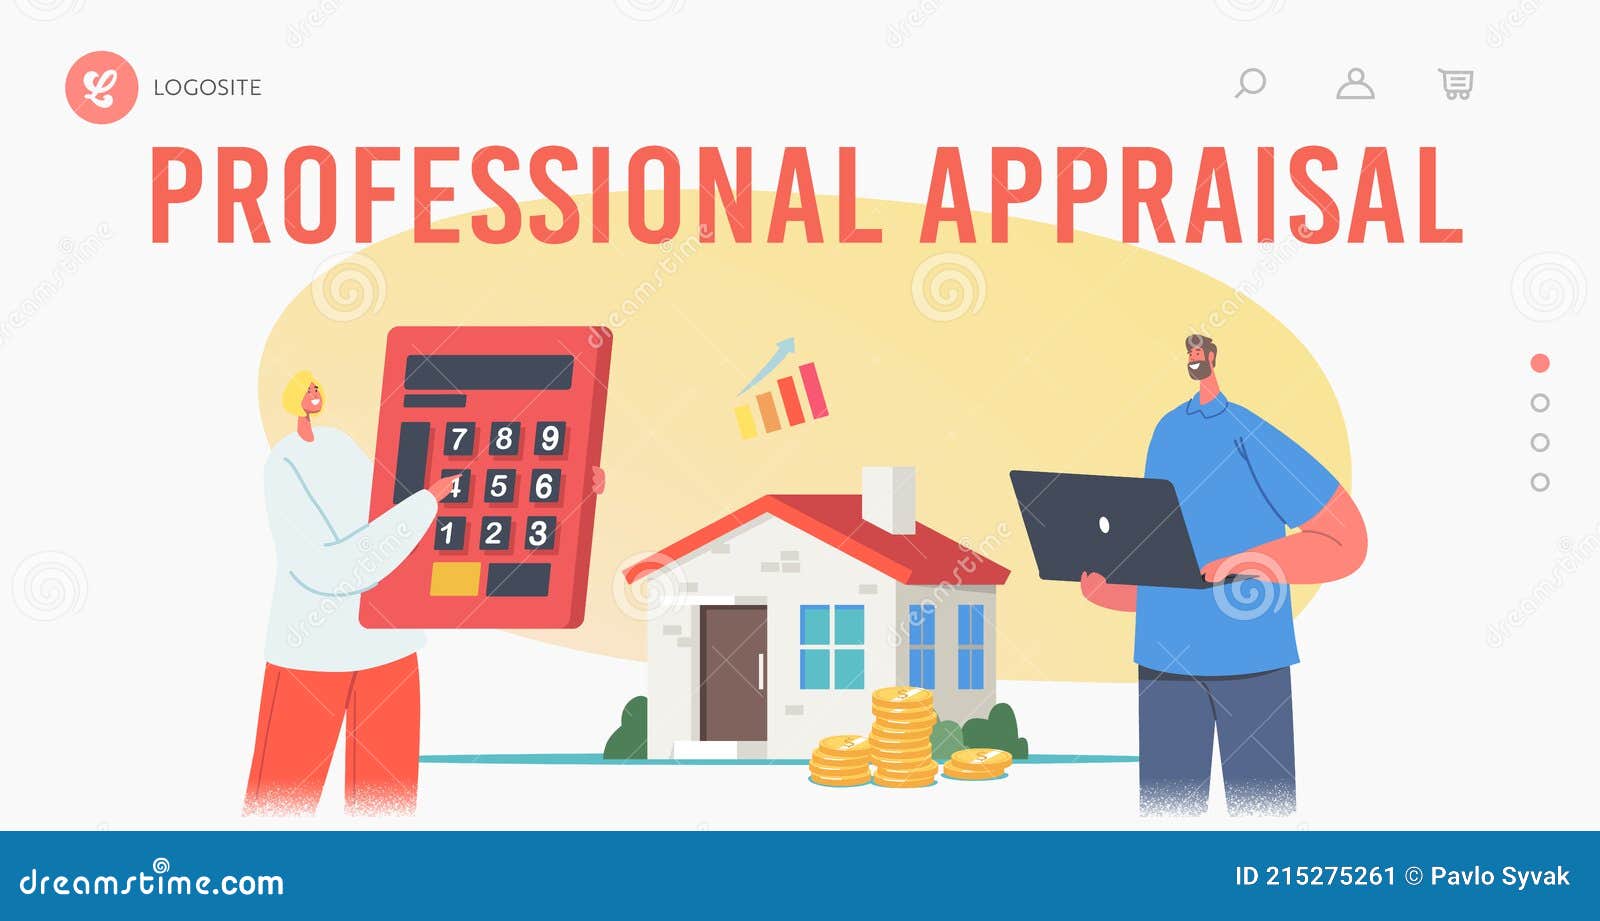 home professional appraisal landing page template. tiny appraisers agents characters holding huge calculator and laptop